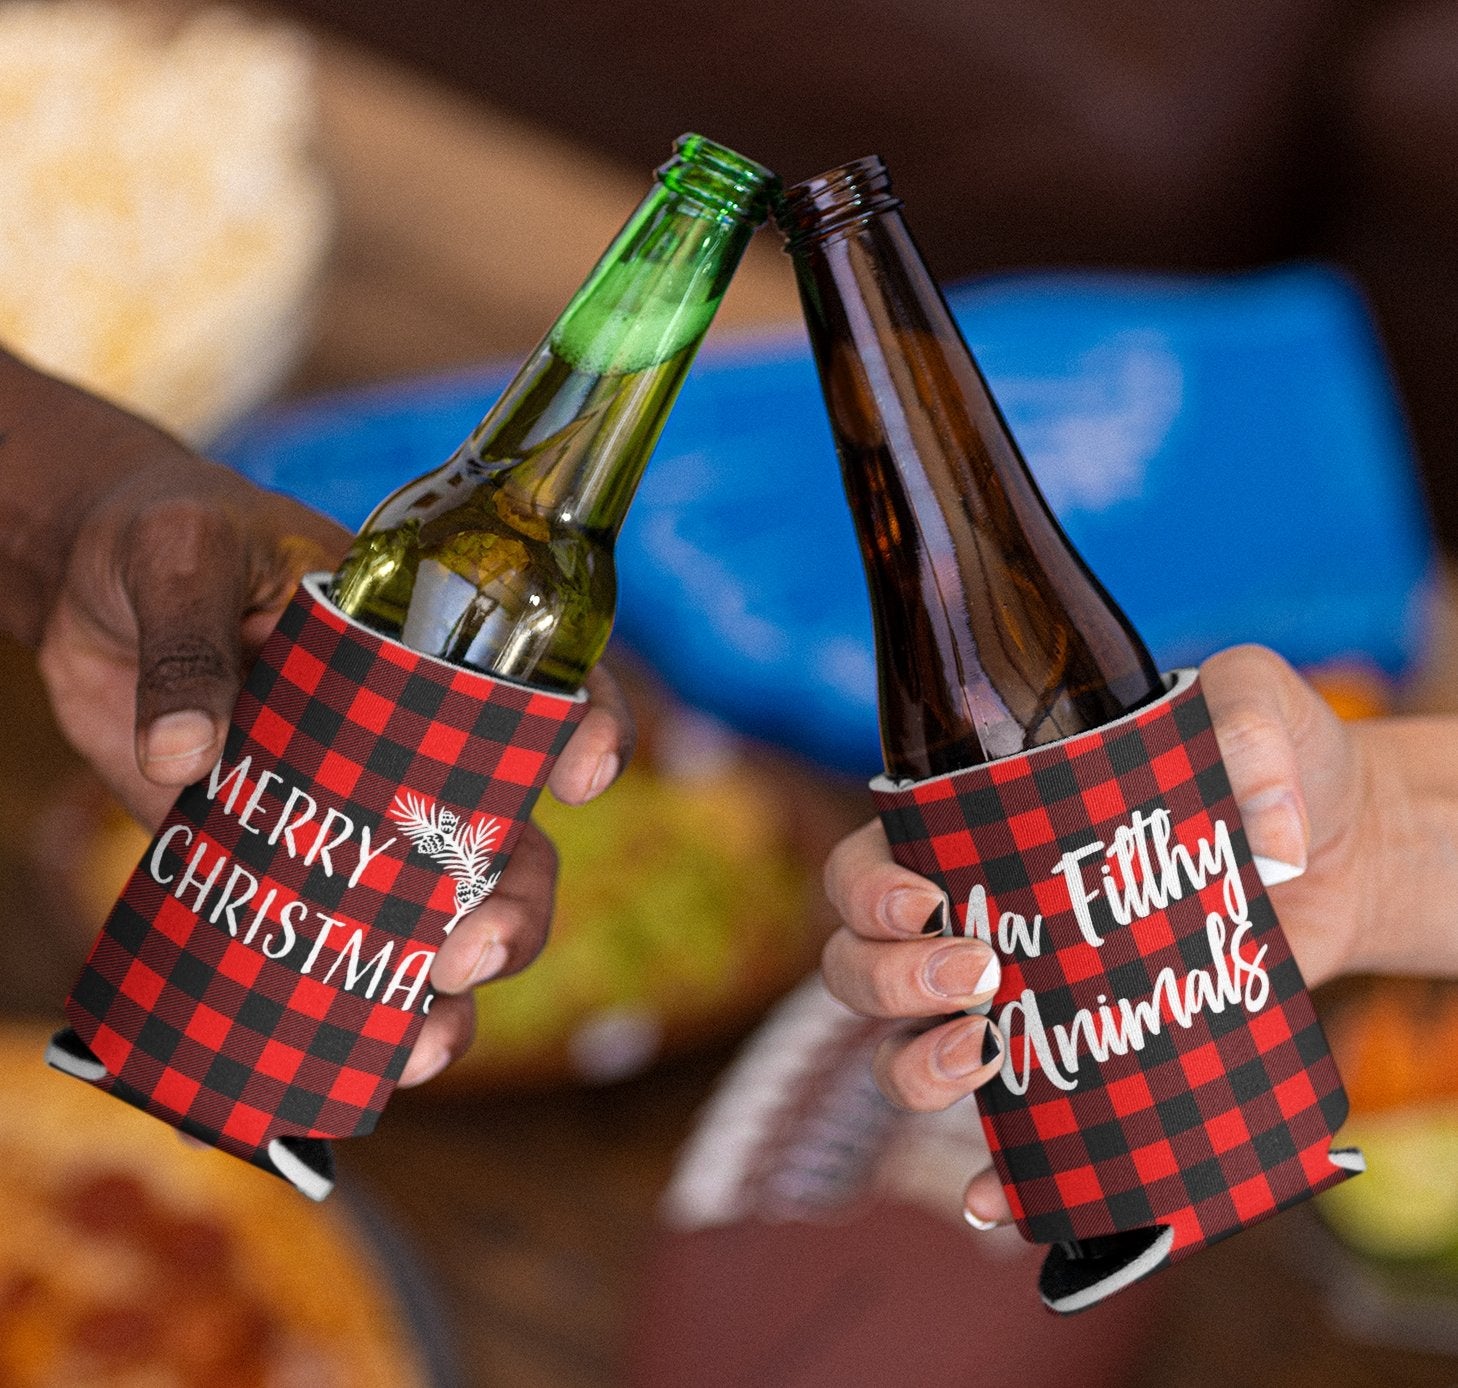 Funny Christmas Can Coolers